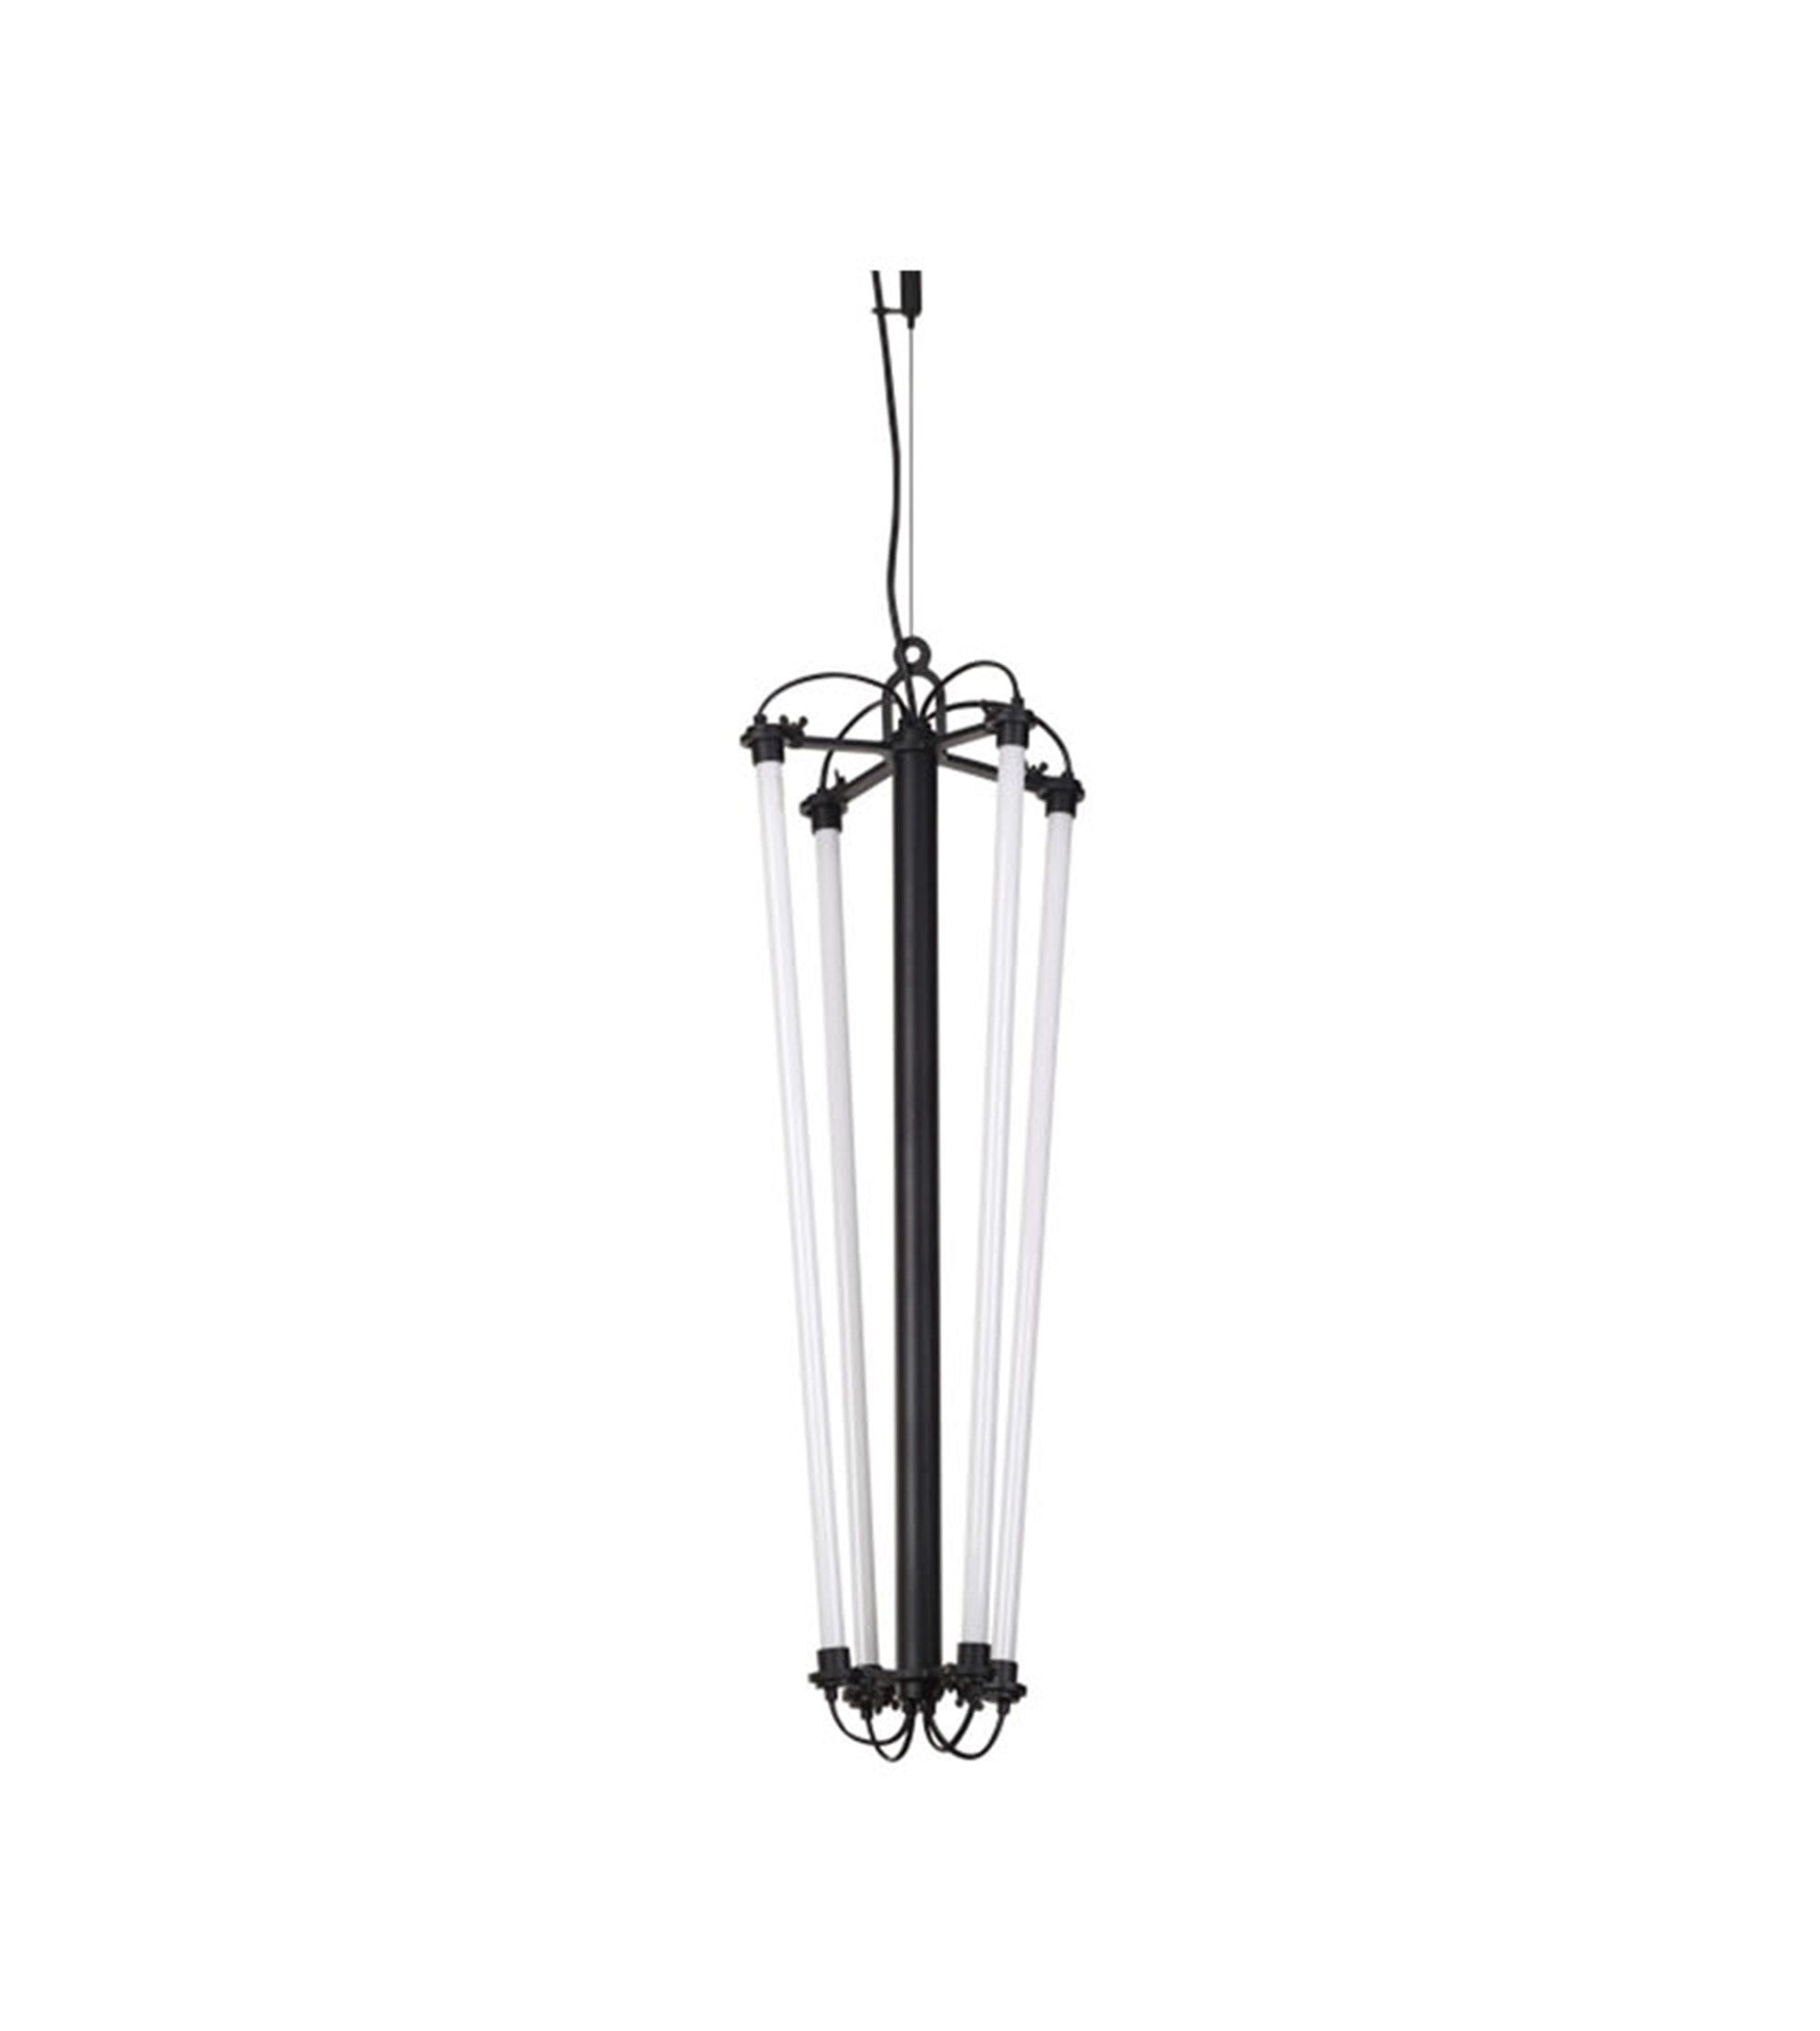 Suspension Mr Tubes dimmable tapered - vertical conique